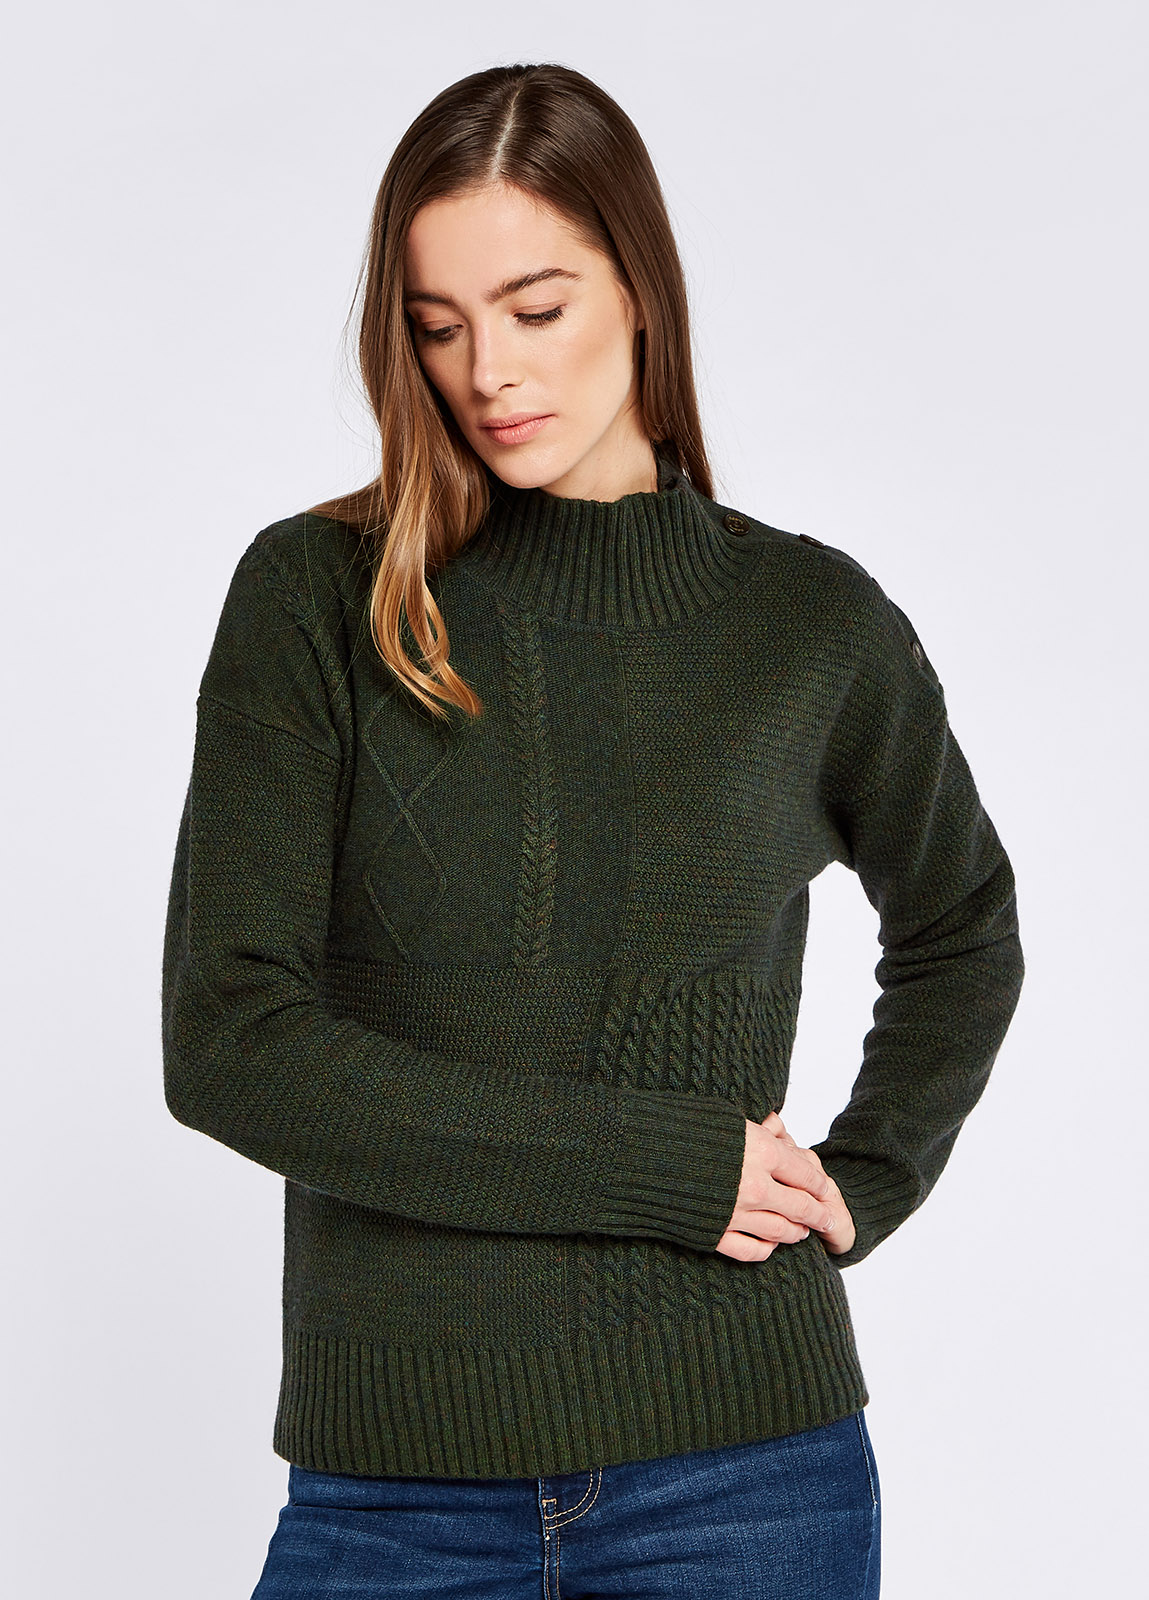 Sullivan Knitted Sweater - Olive